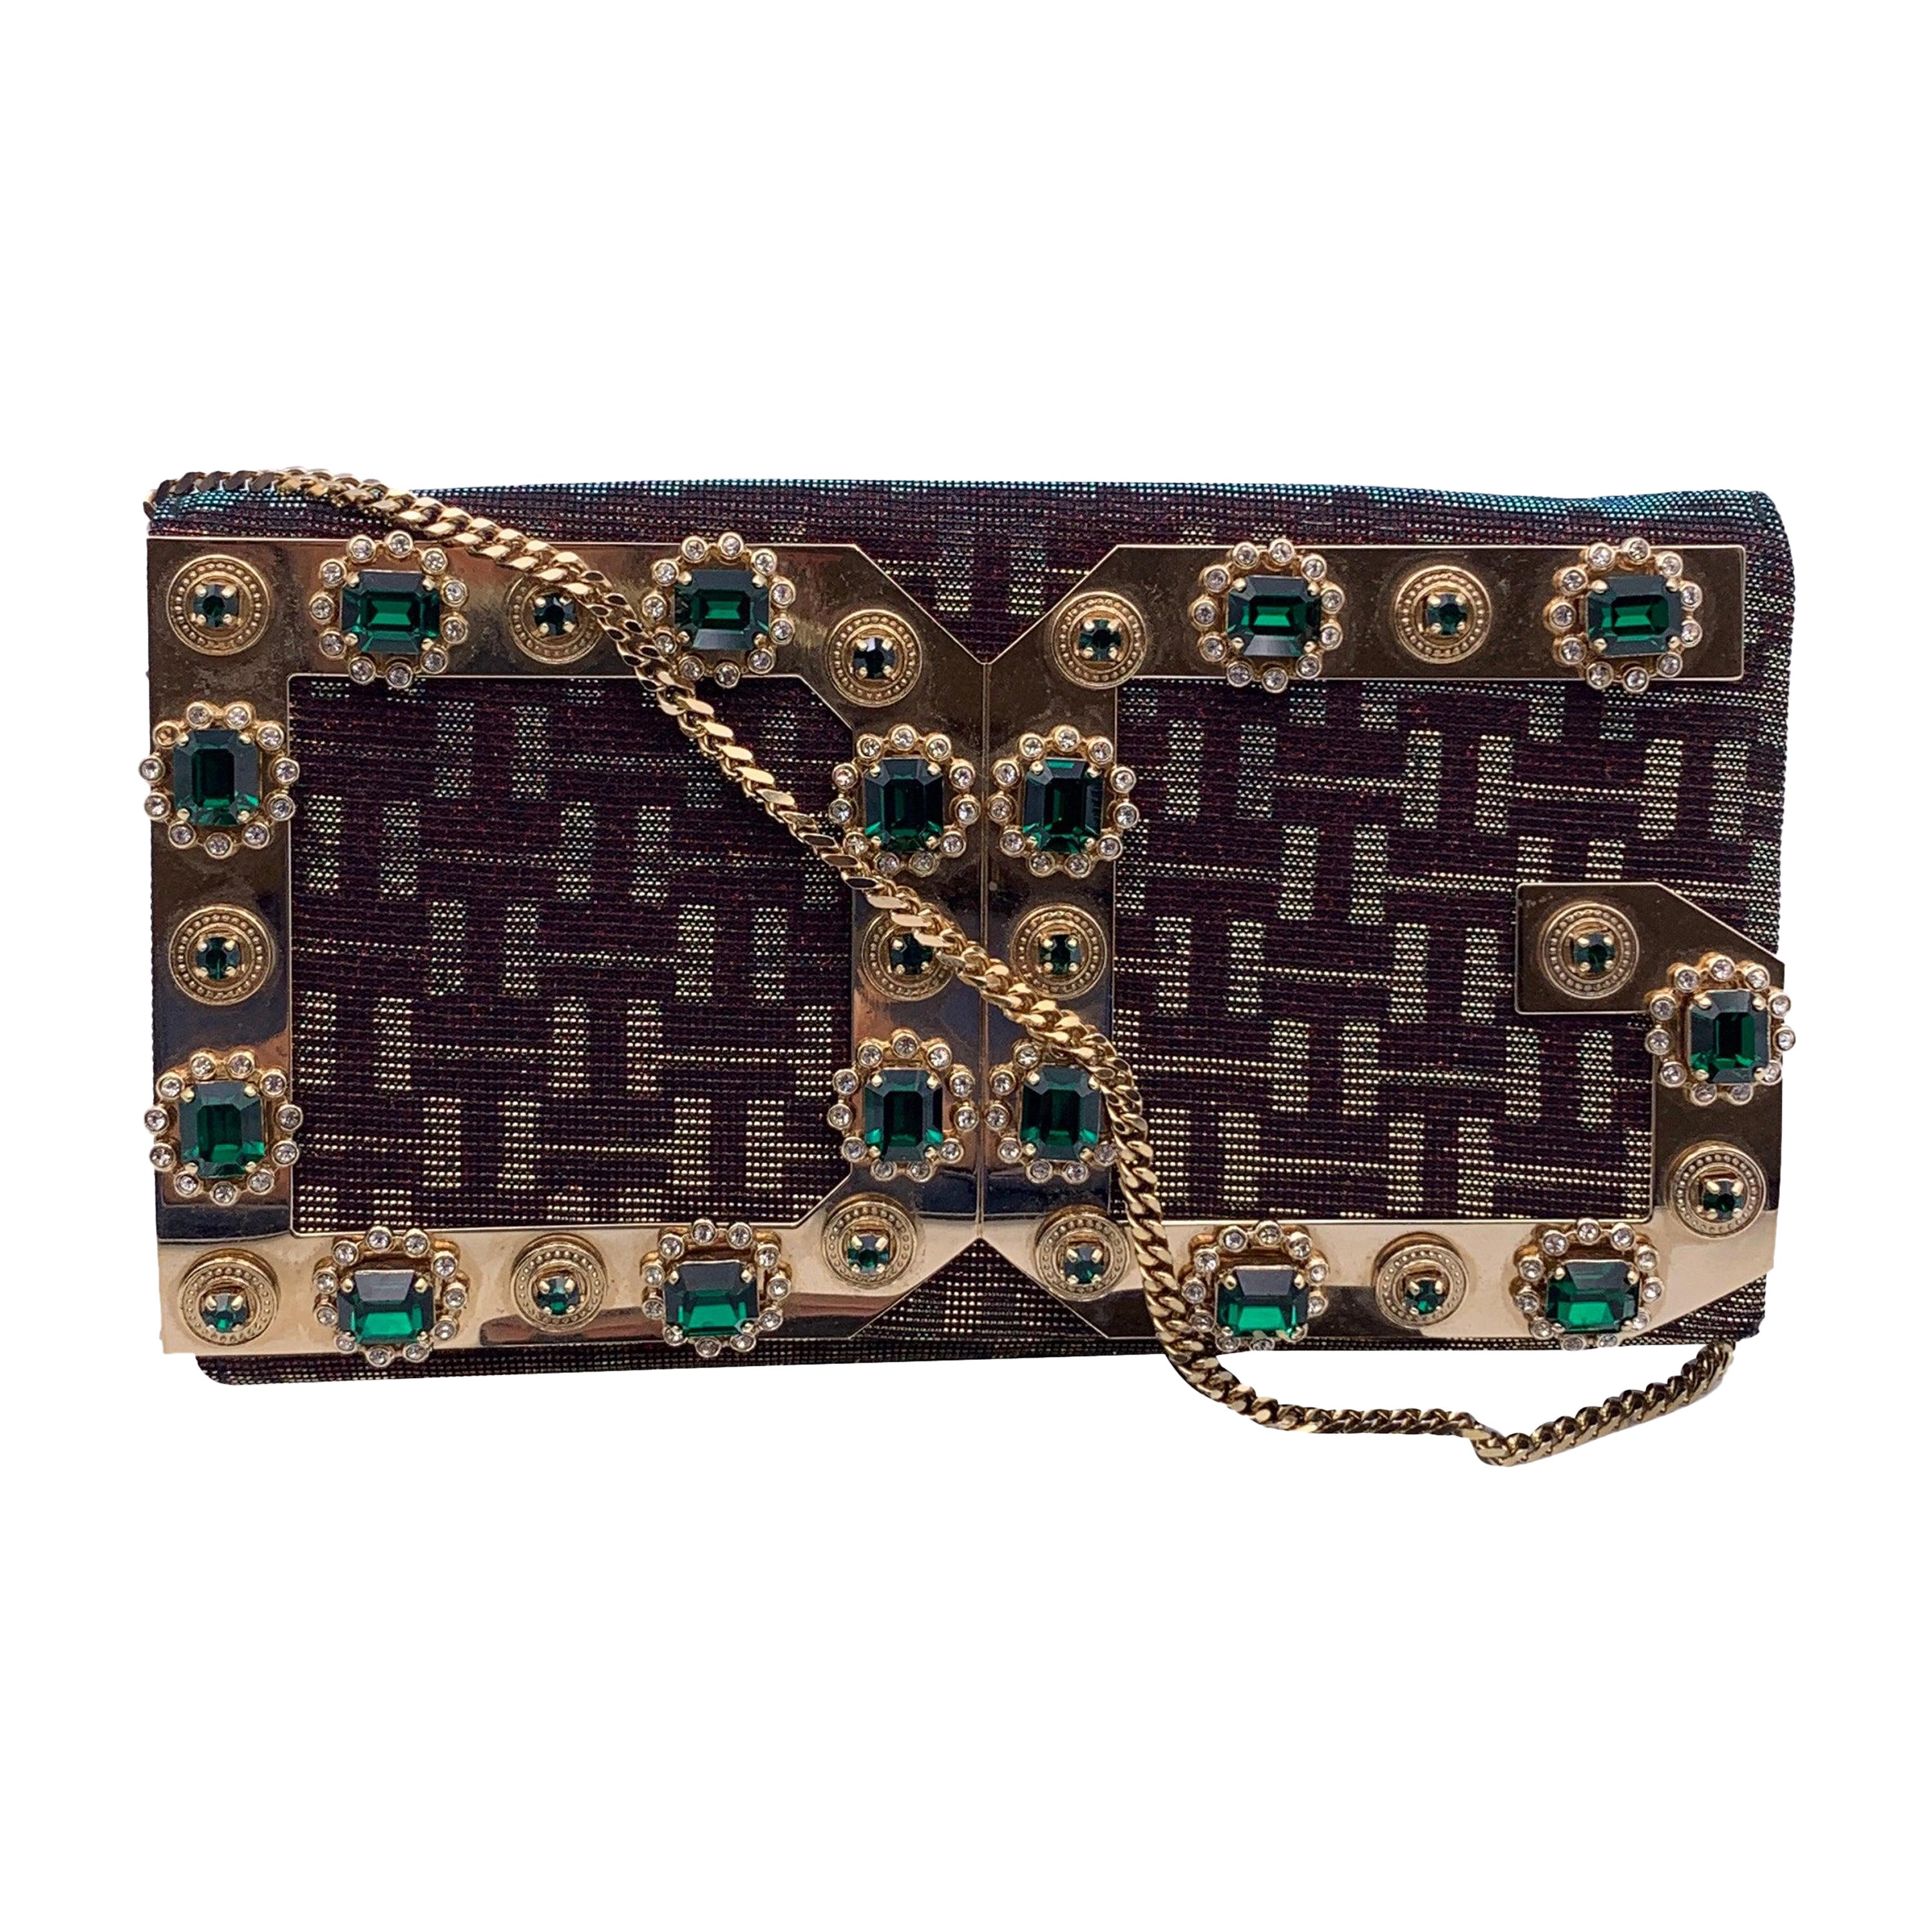 Dolce & Gabbana Embellished Evening Bag Clutch with Chain Strap